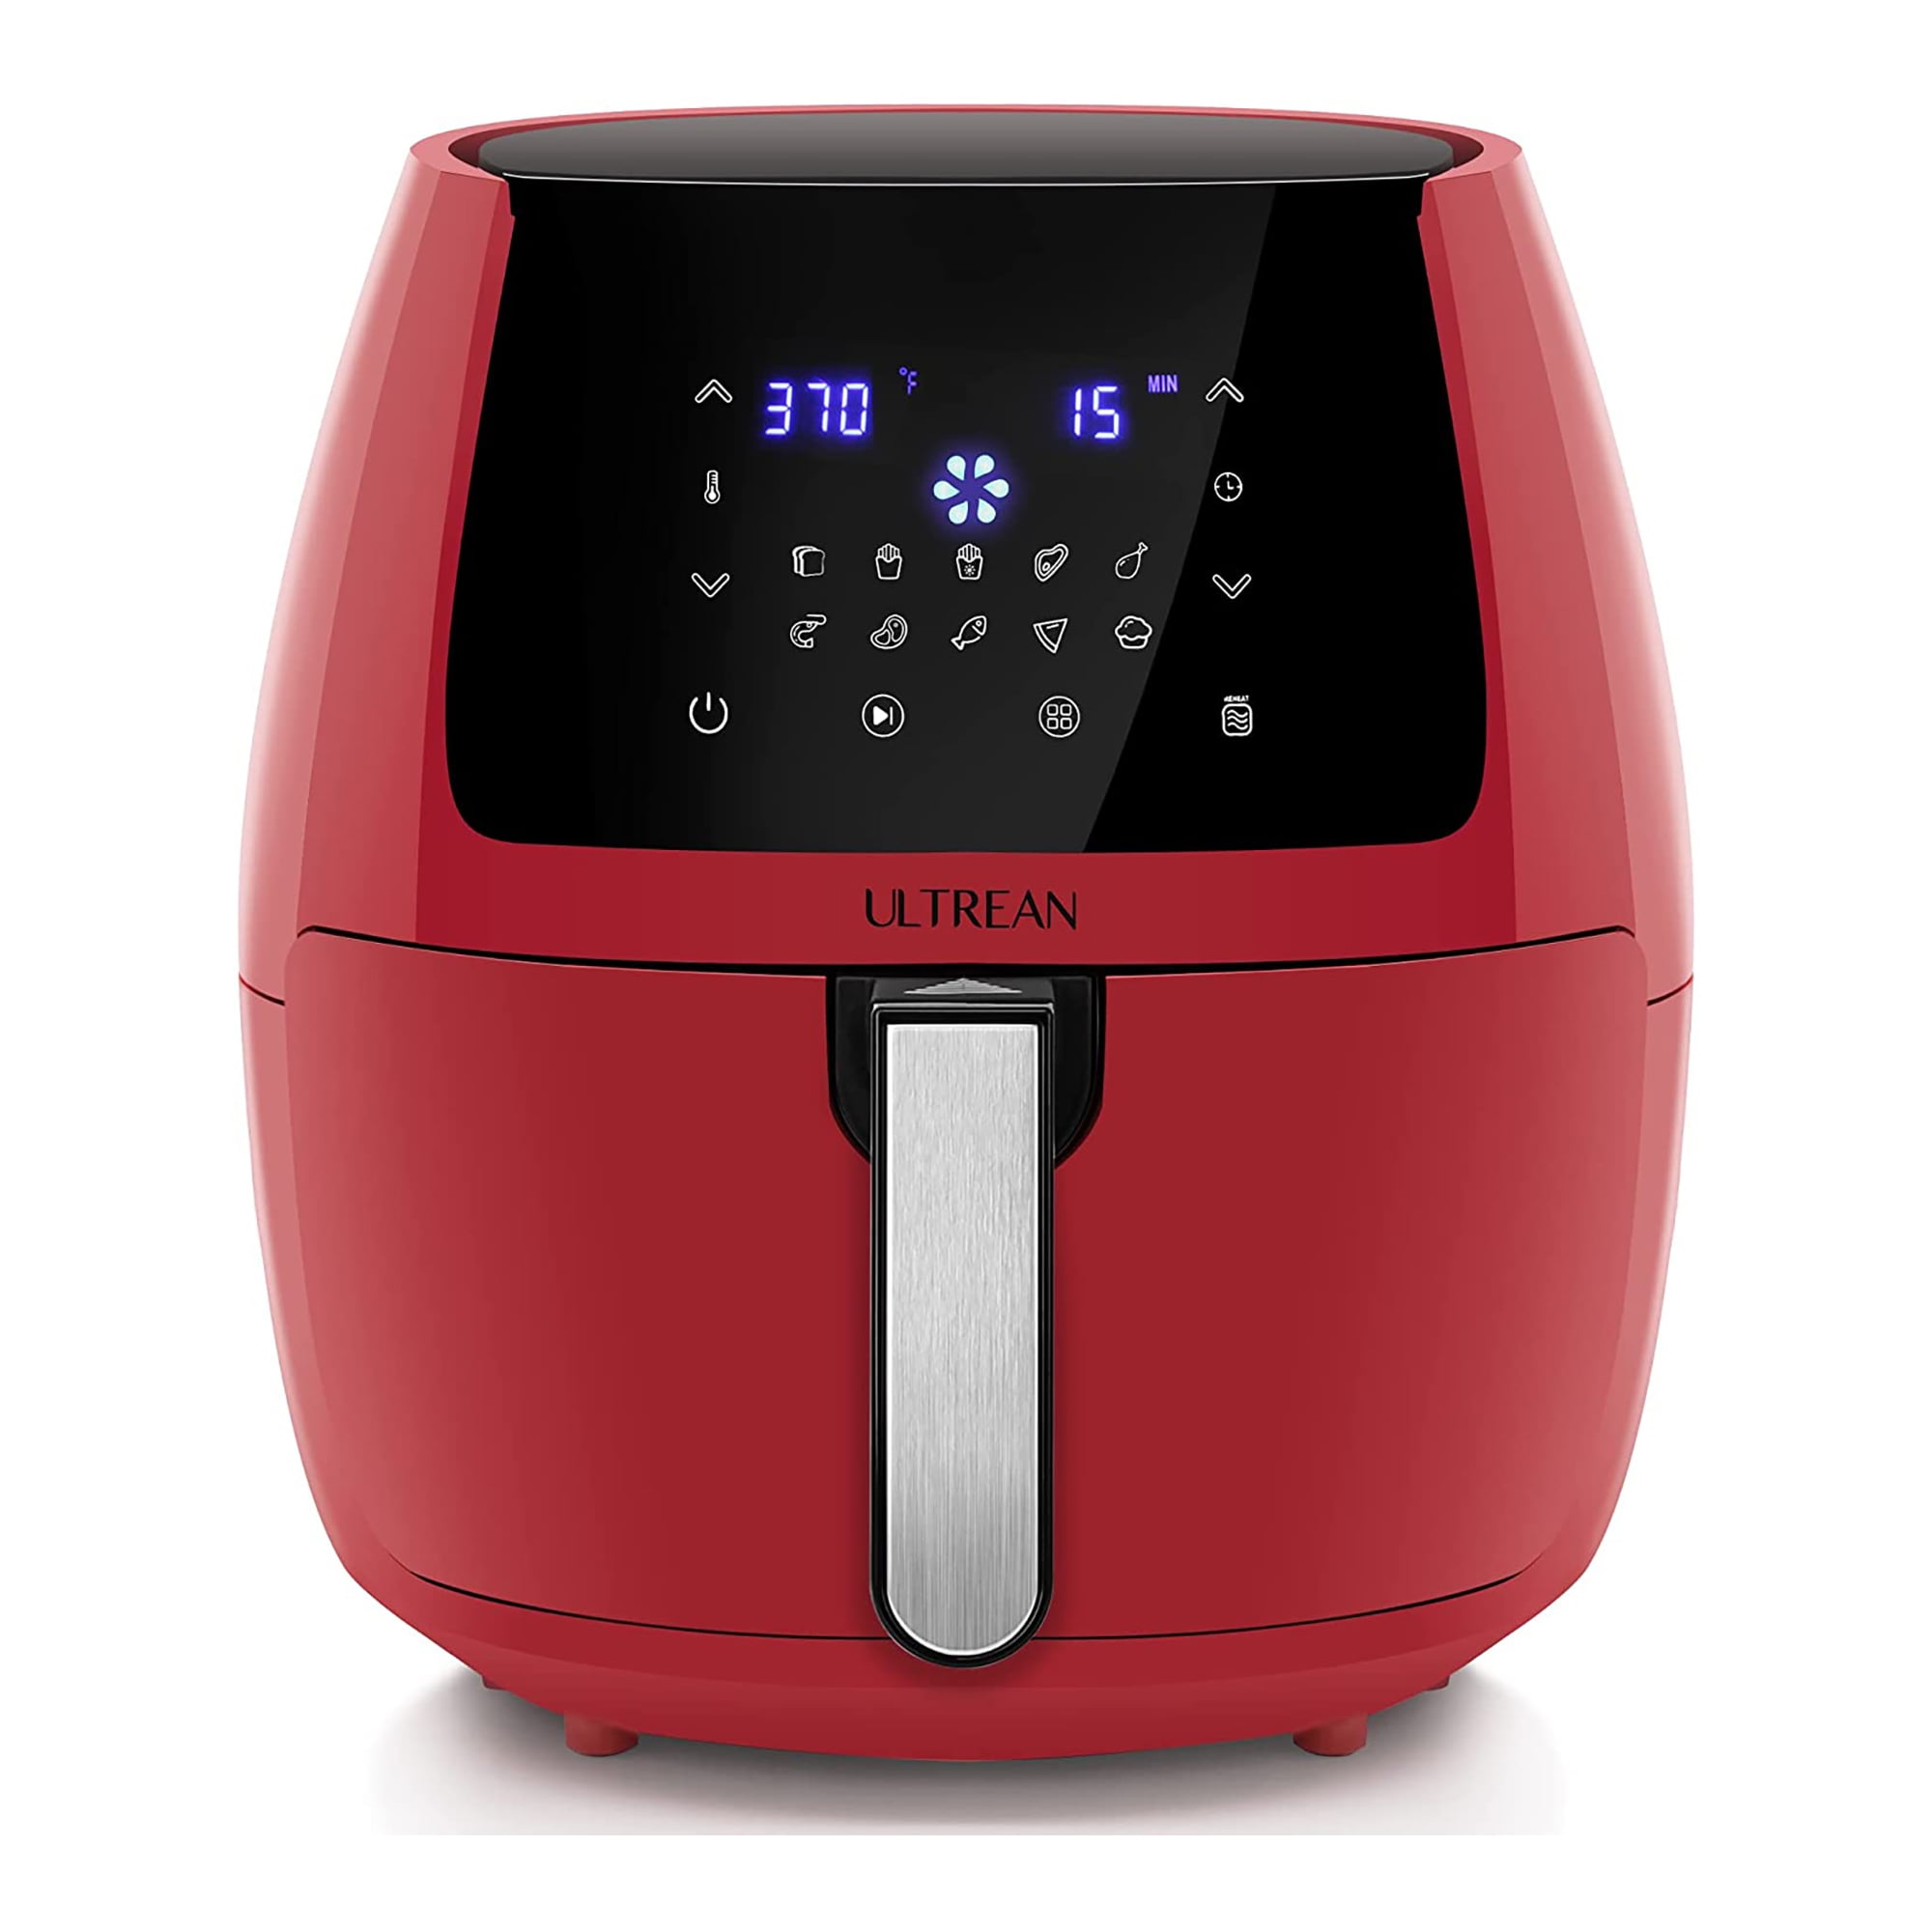 SUPER DEAL Zenchef 8in1 5.8QT Electric Air Fryer 1800W Family Size Oil Free w/Time & Temperature Control Dishwasher Safe Parts 